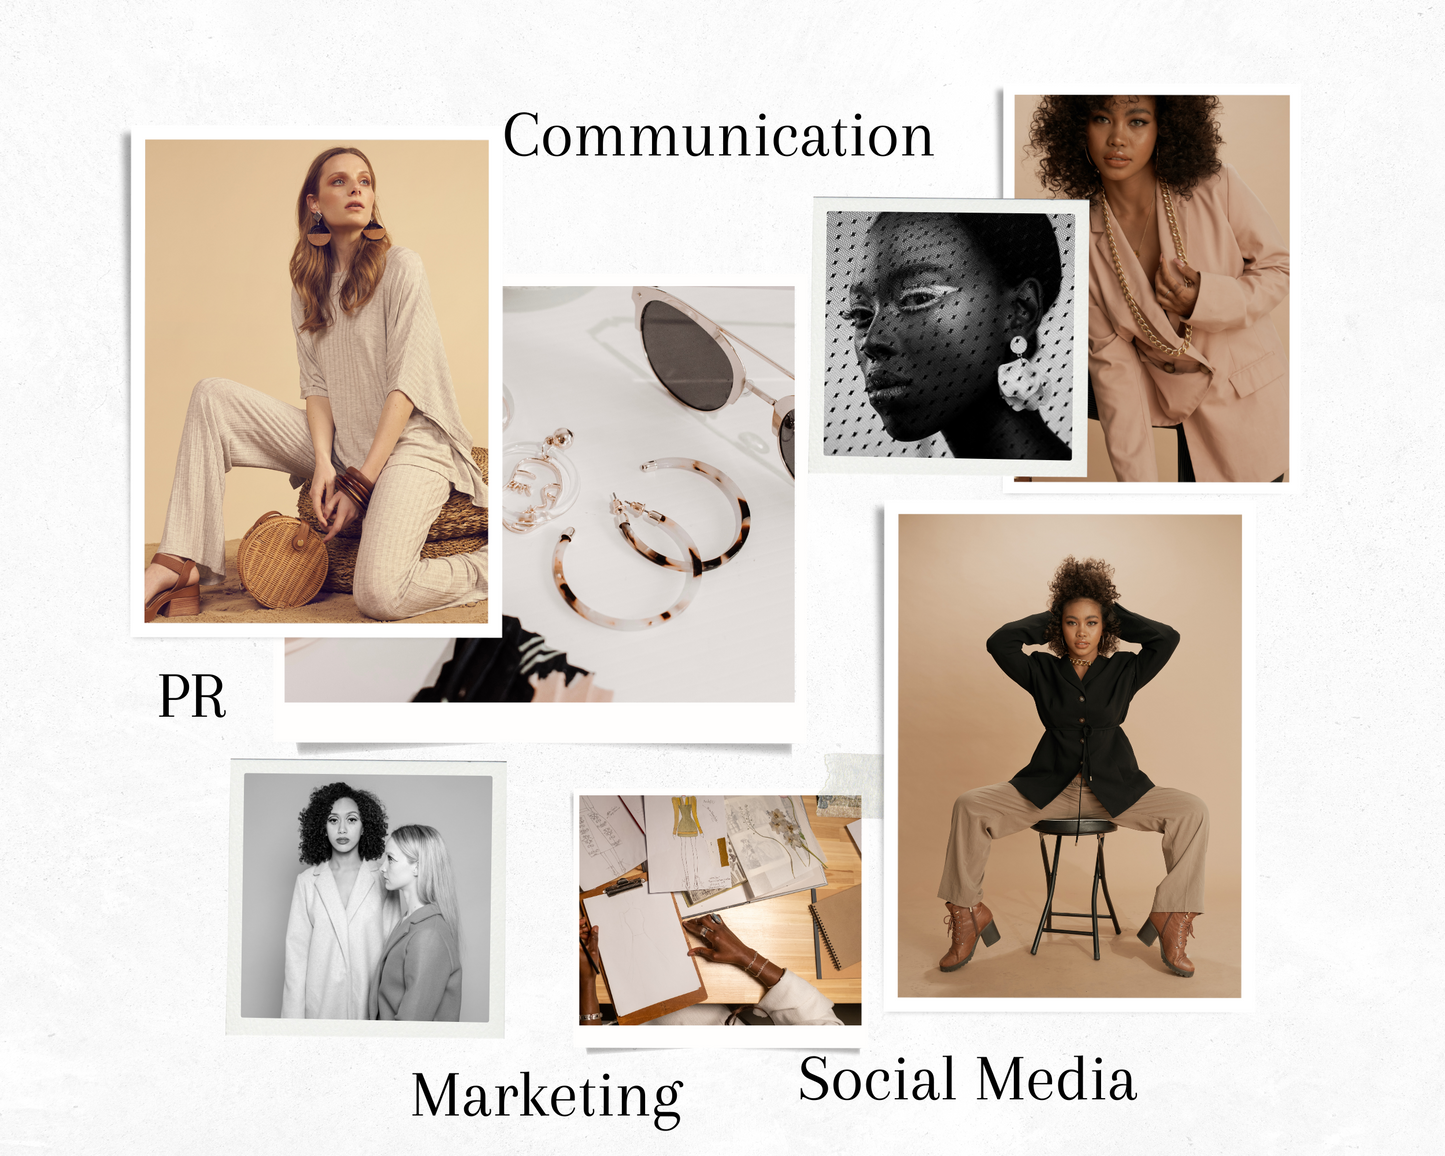 Personalized consulting for fashion and beauty brands